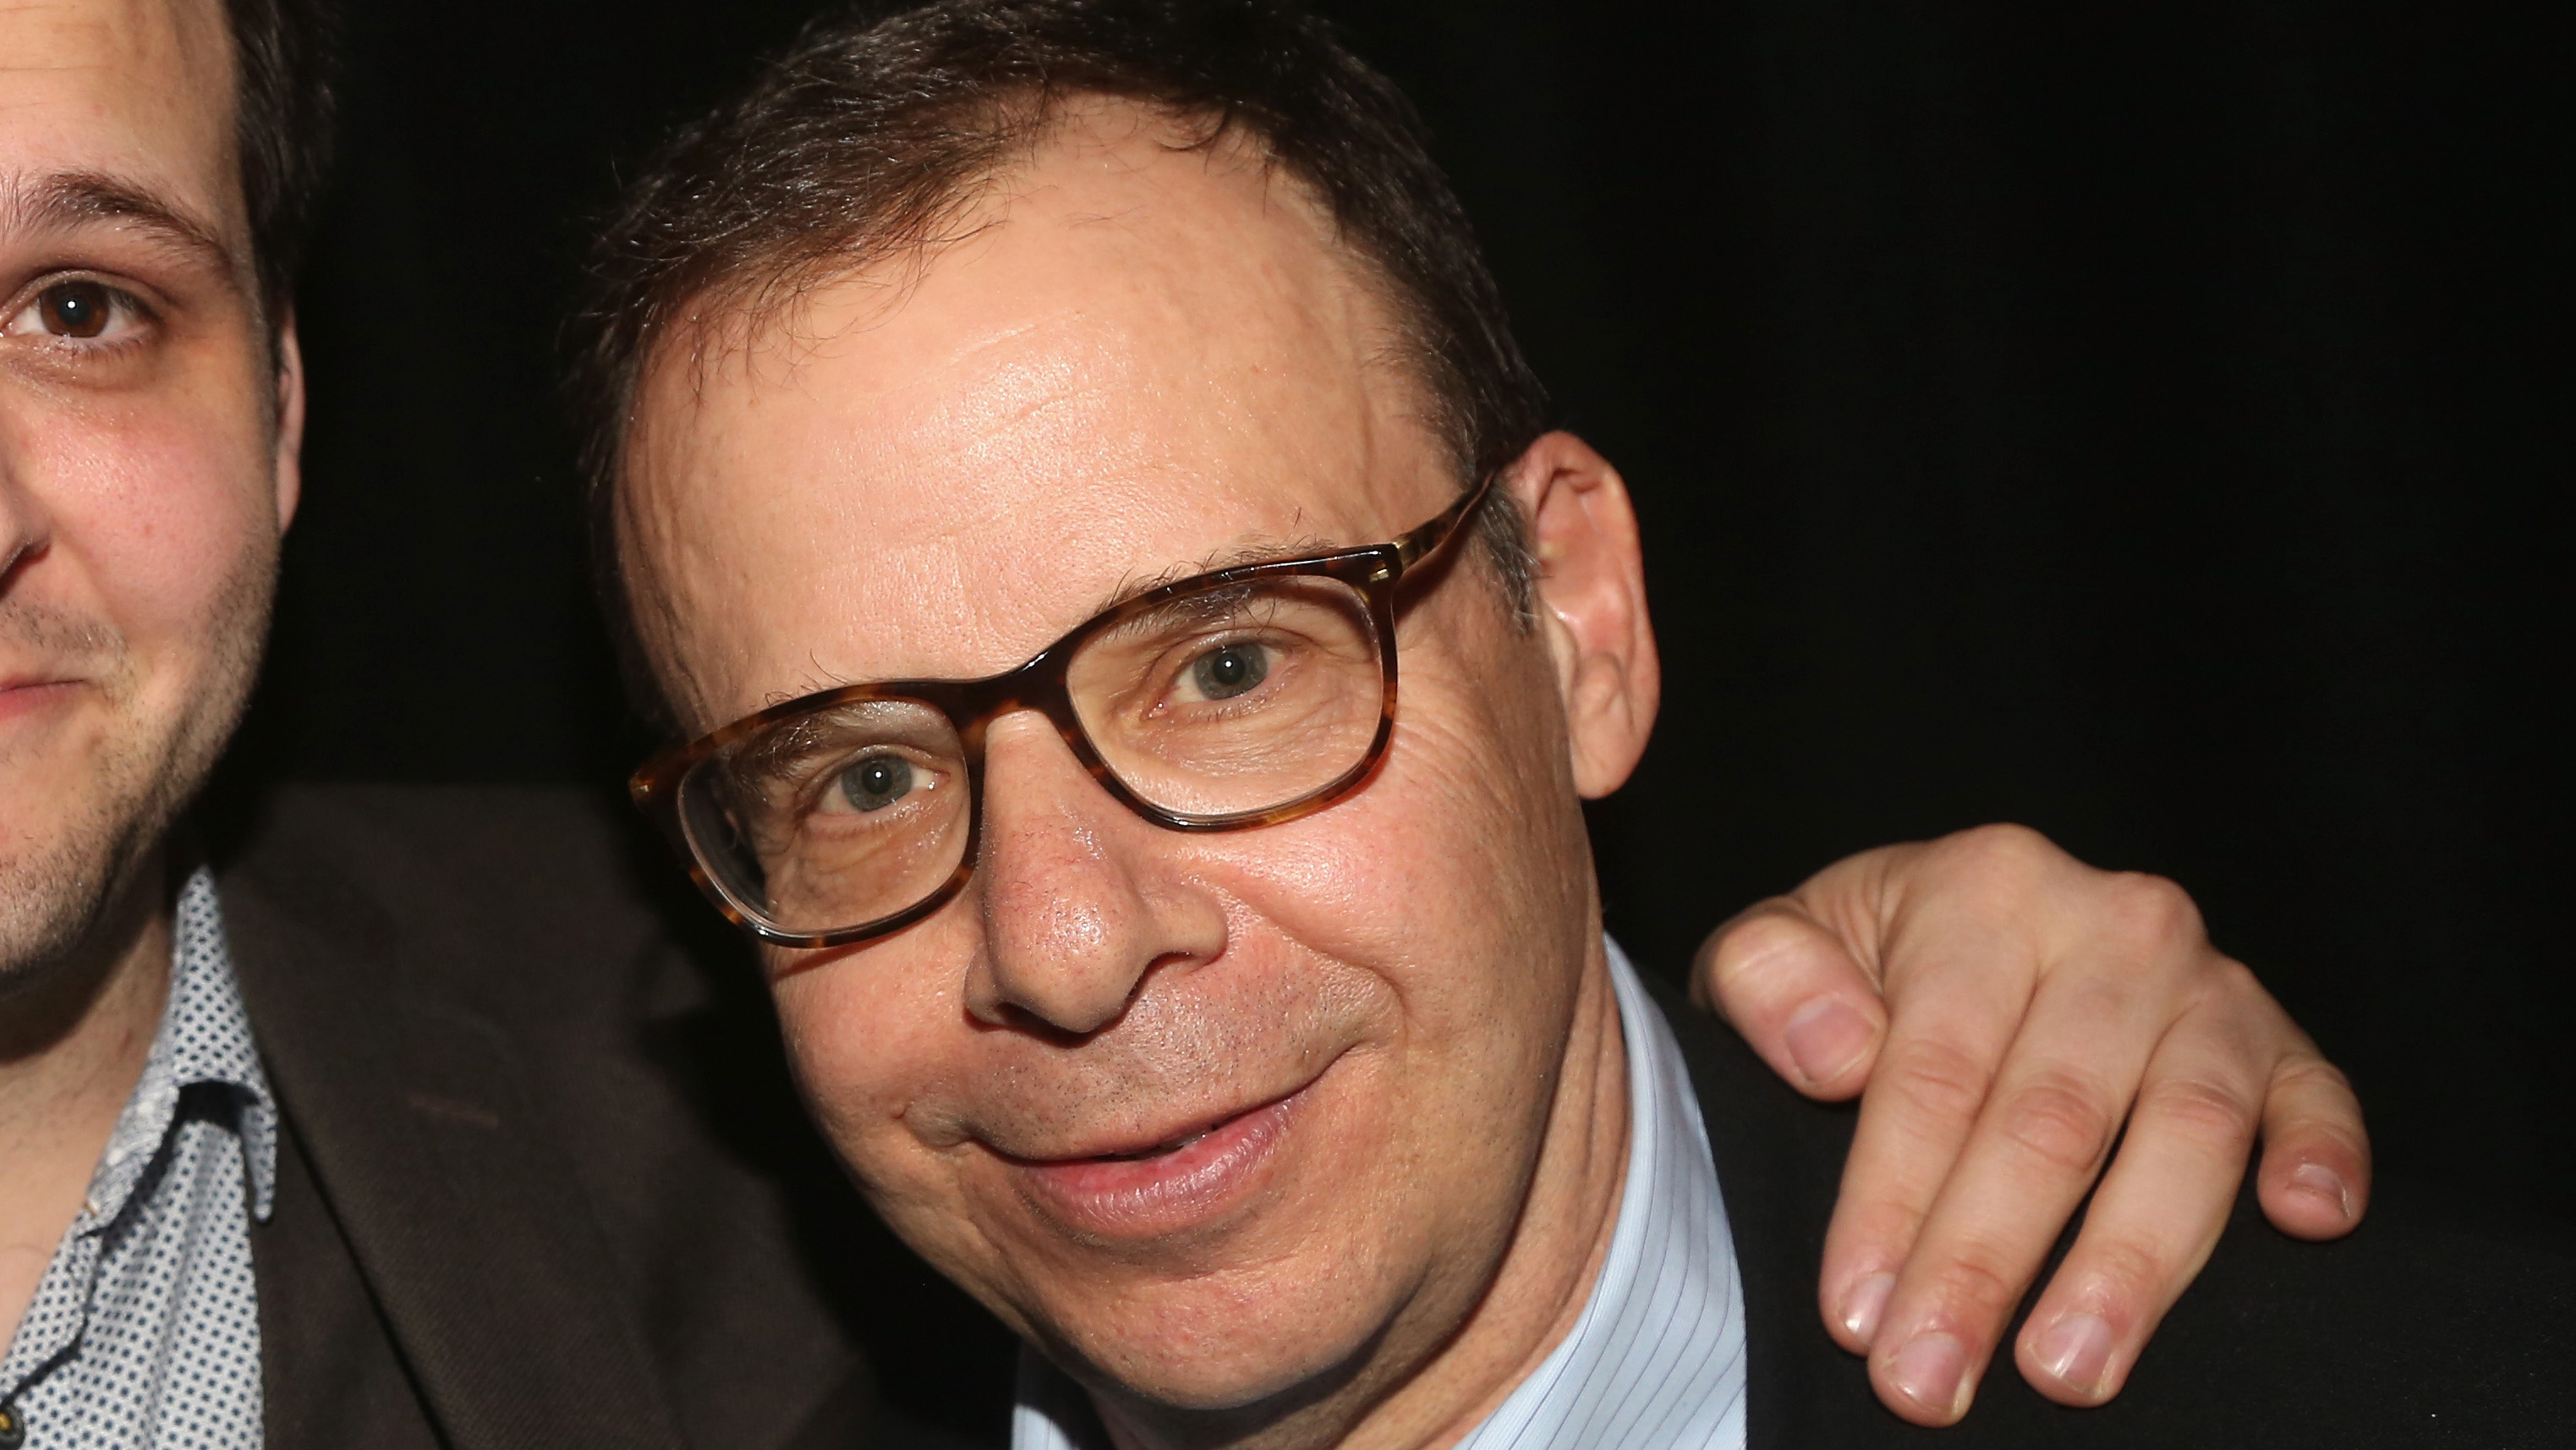 Rick Moranis Is Returning to TV to Reprise Spaceballs Role3046 x 1714